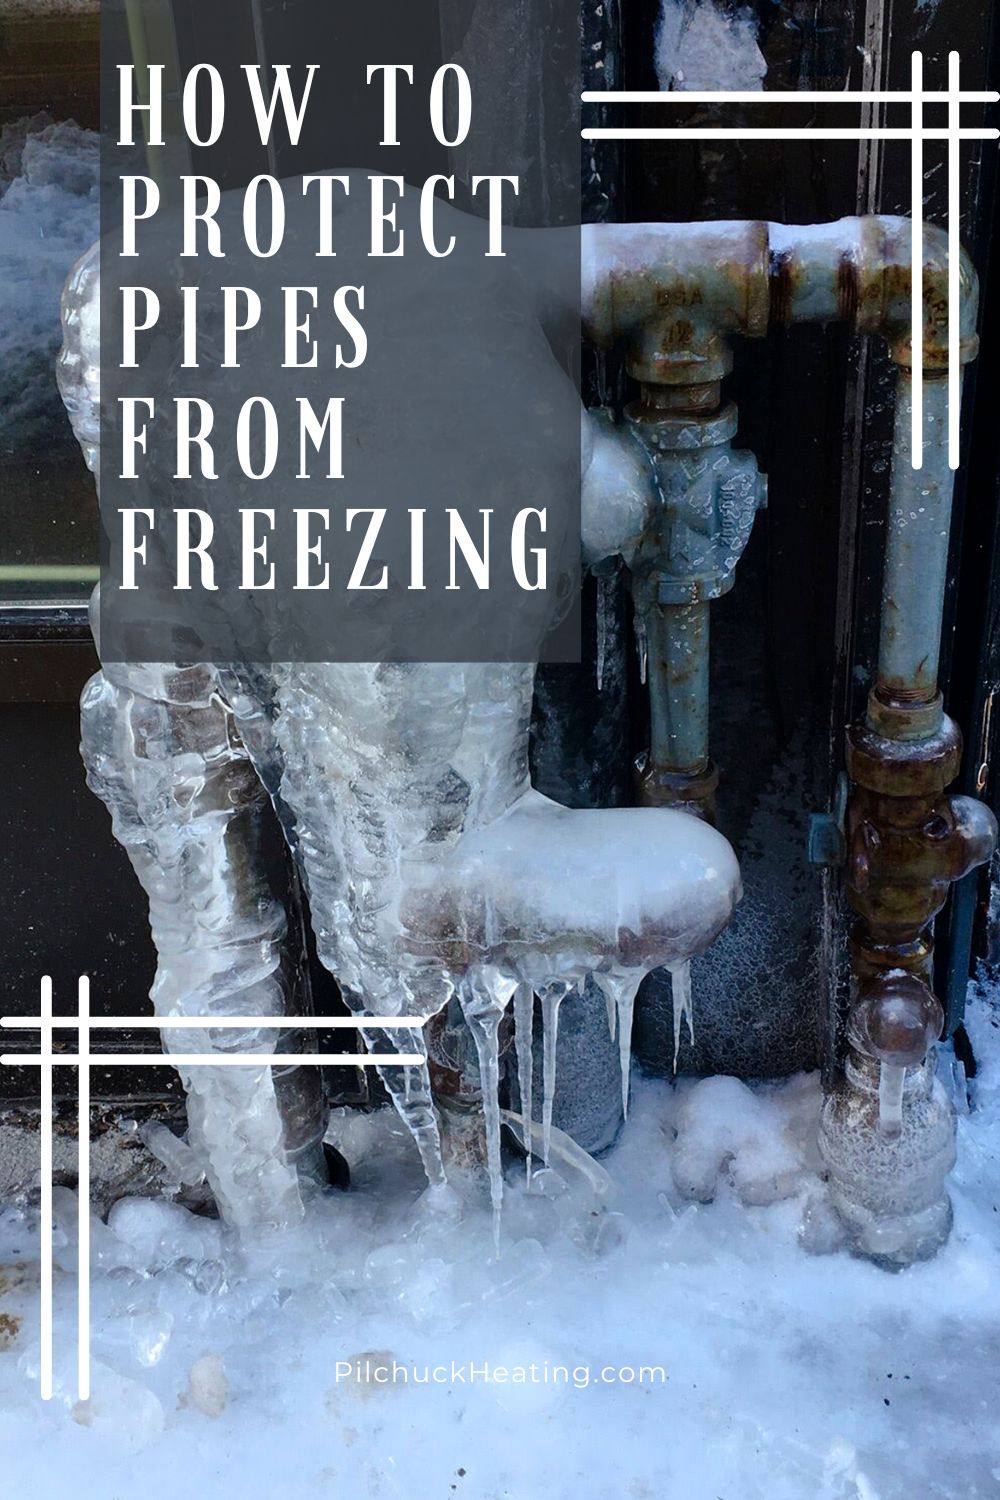 How to Protect Pipes From Freezing